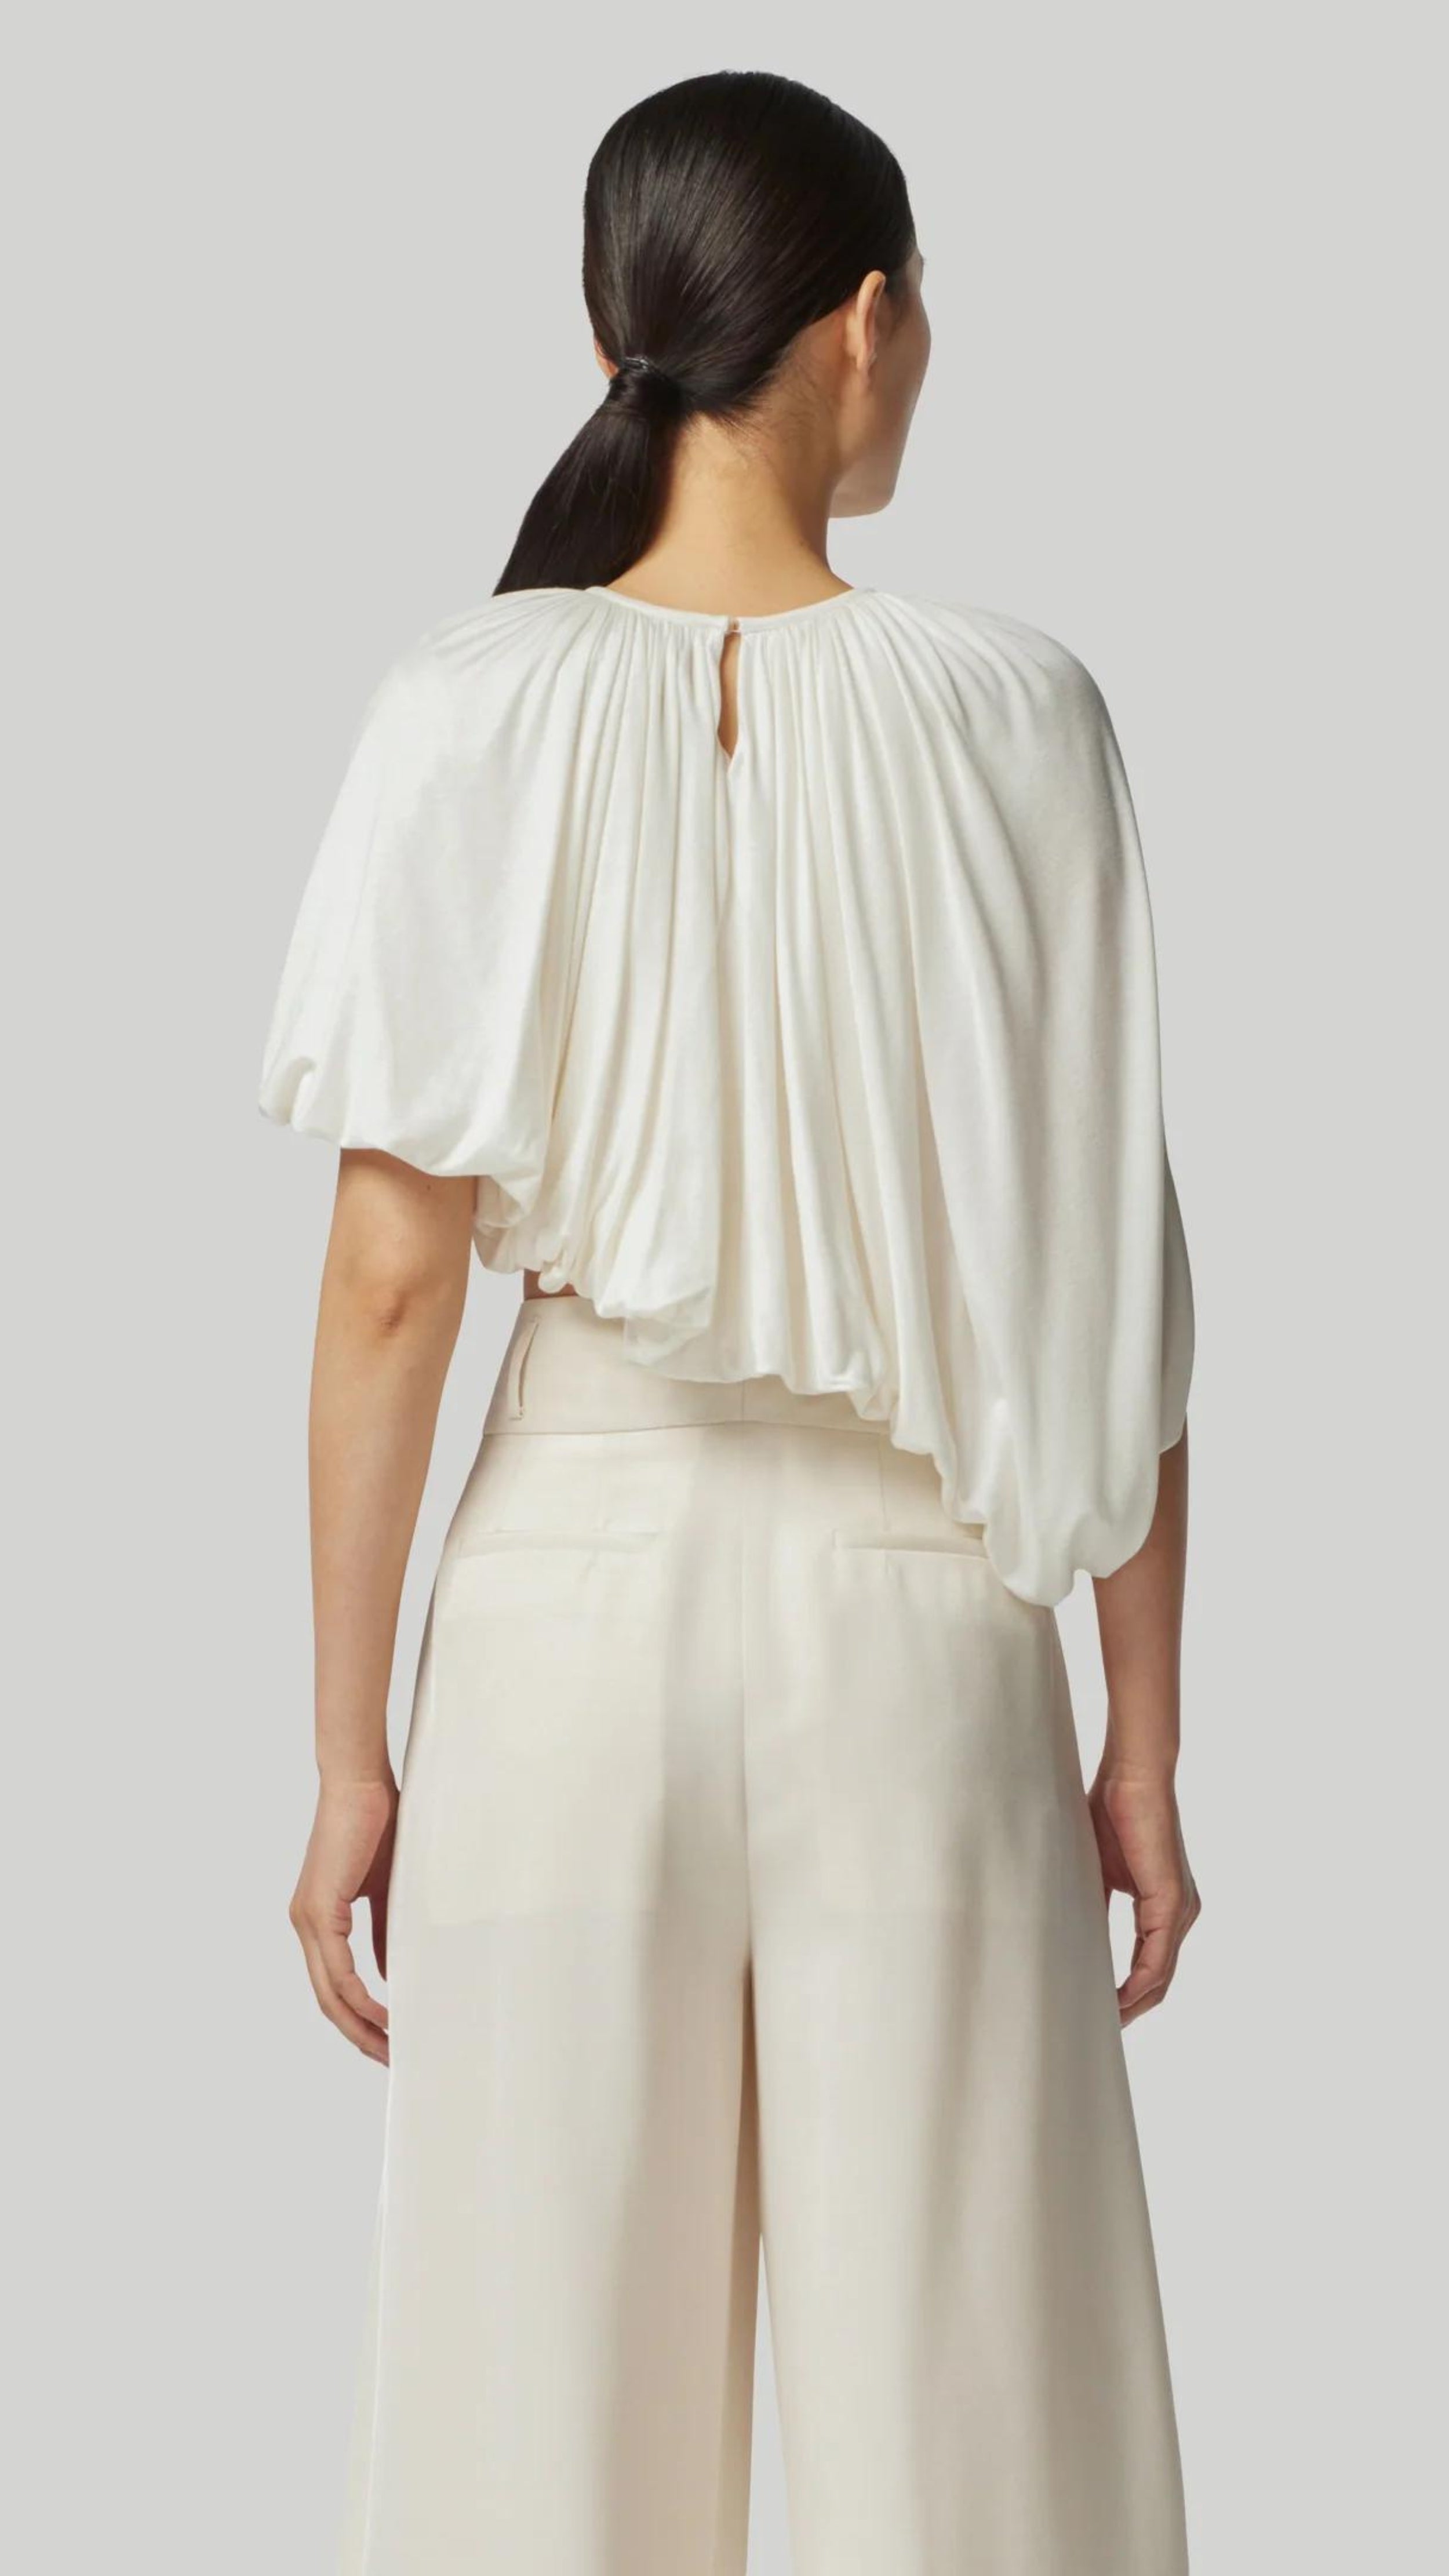 Altuzarra Naxos Top in Ivory. Draped jersey create a fluid look with an asymmetrical hemline. Shown on model facing to the back